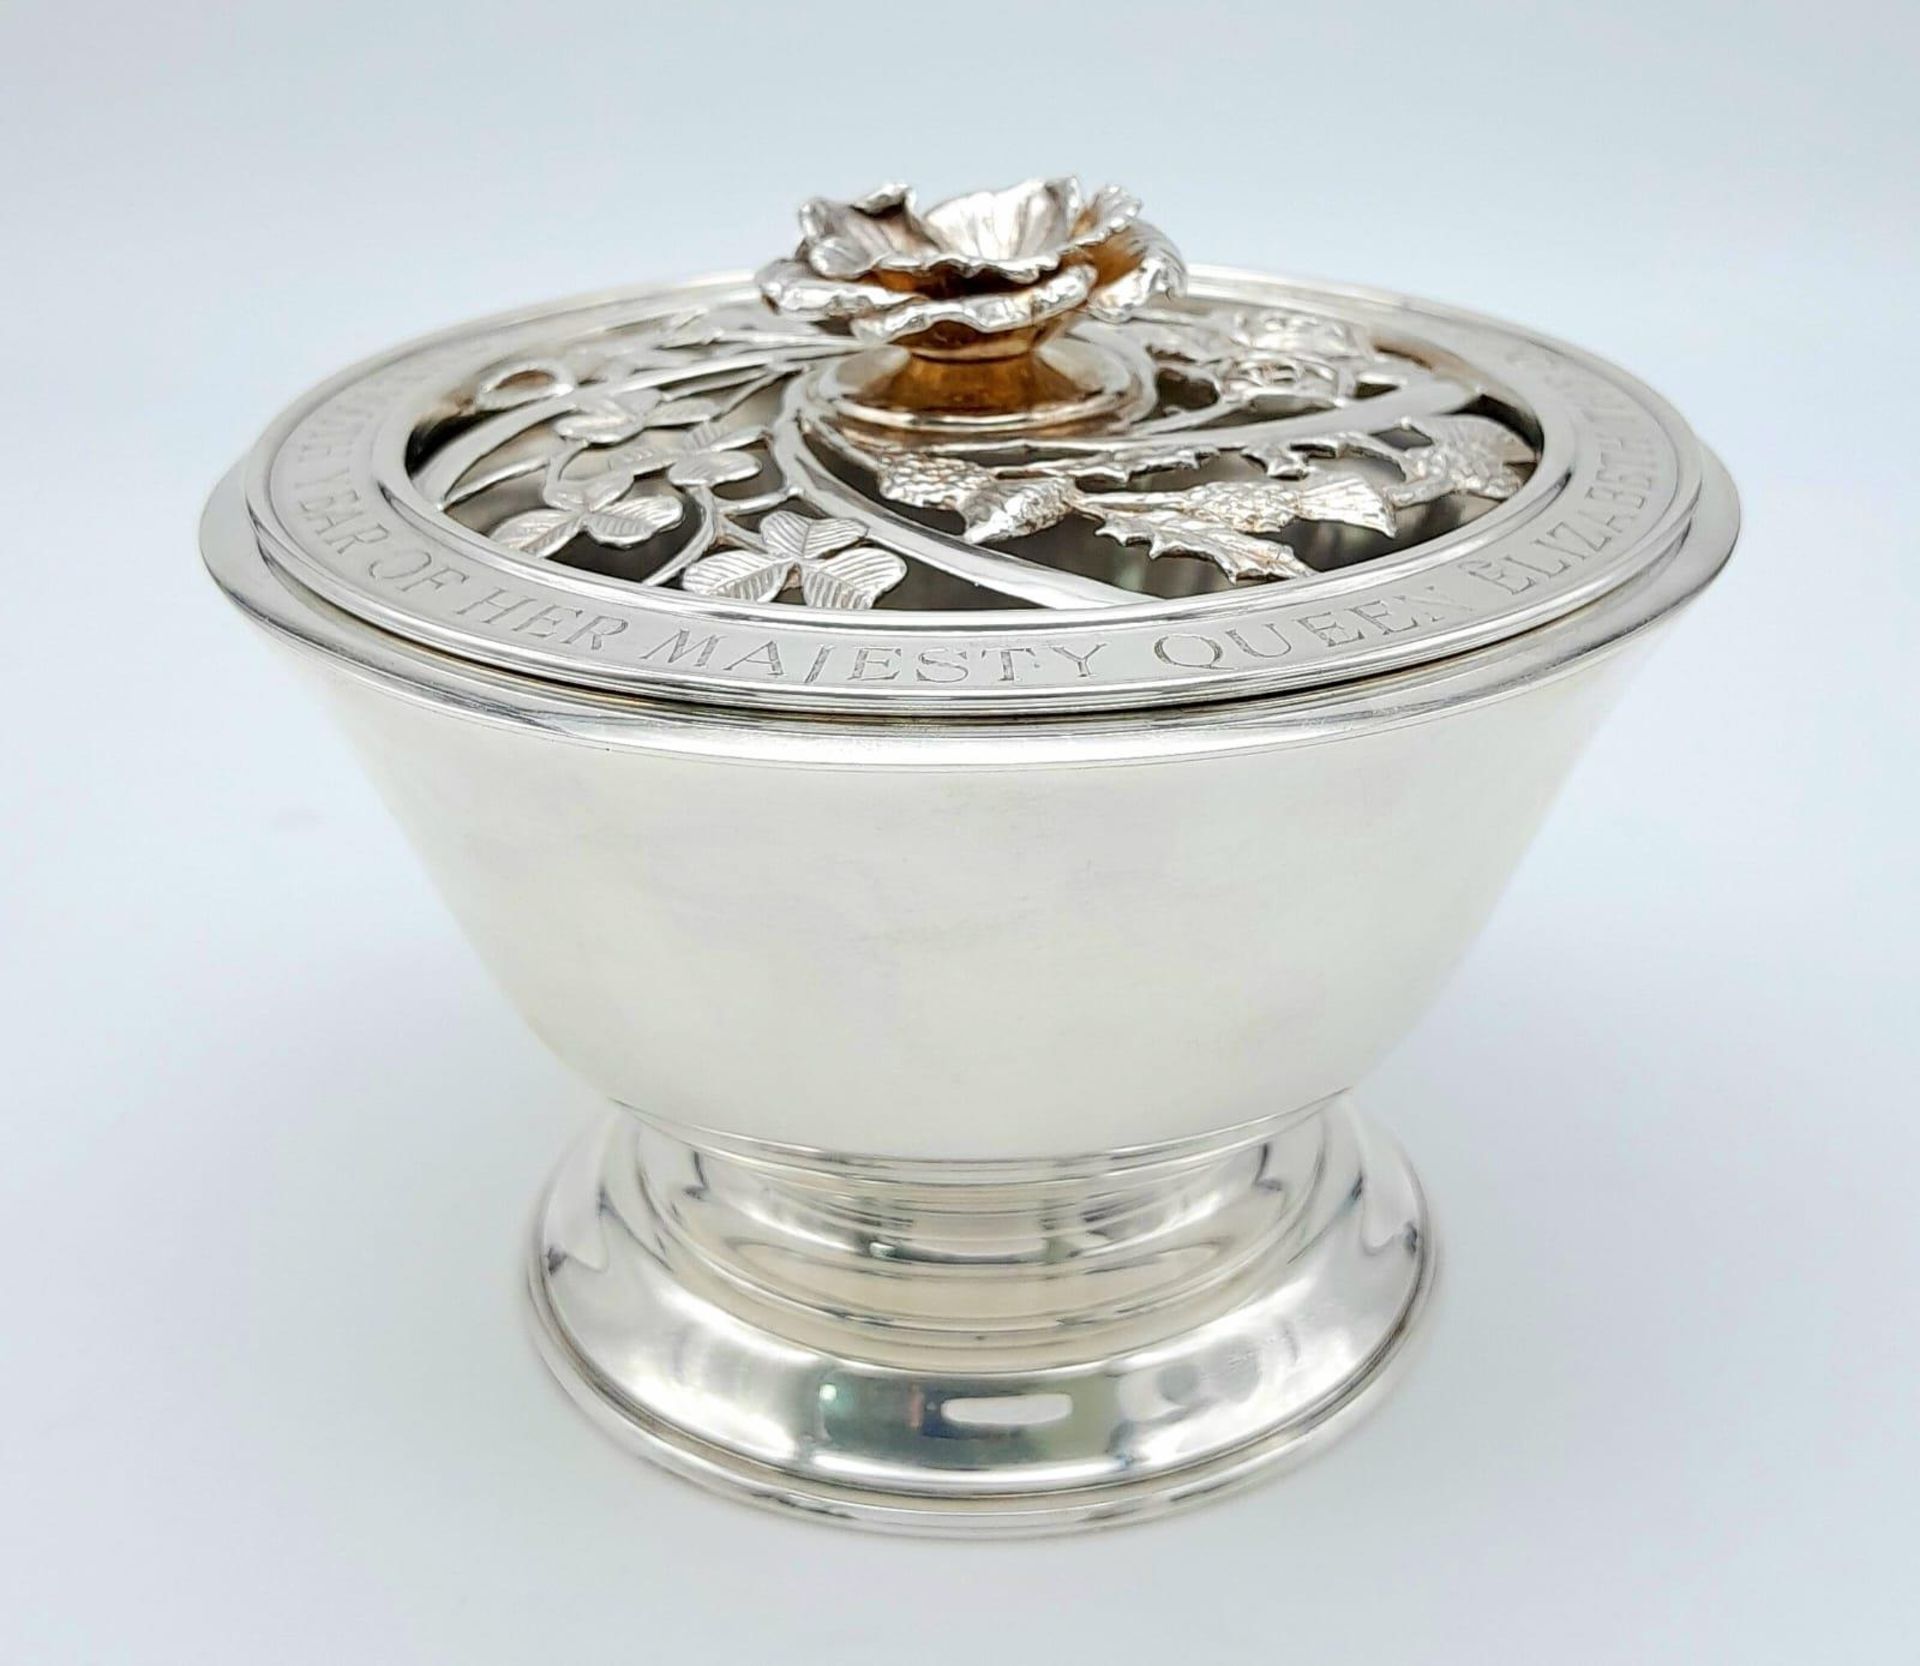 An Asprey of London Limited Edition (55 of 100) Sterling Silver Posy Bowl. Beautiful ornate and - Image 2 of 10